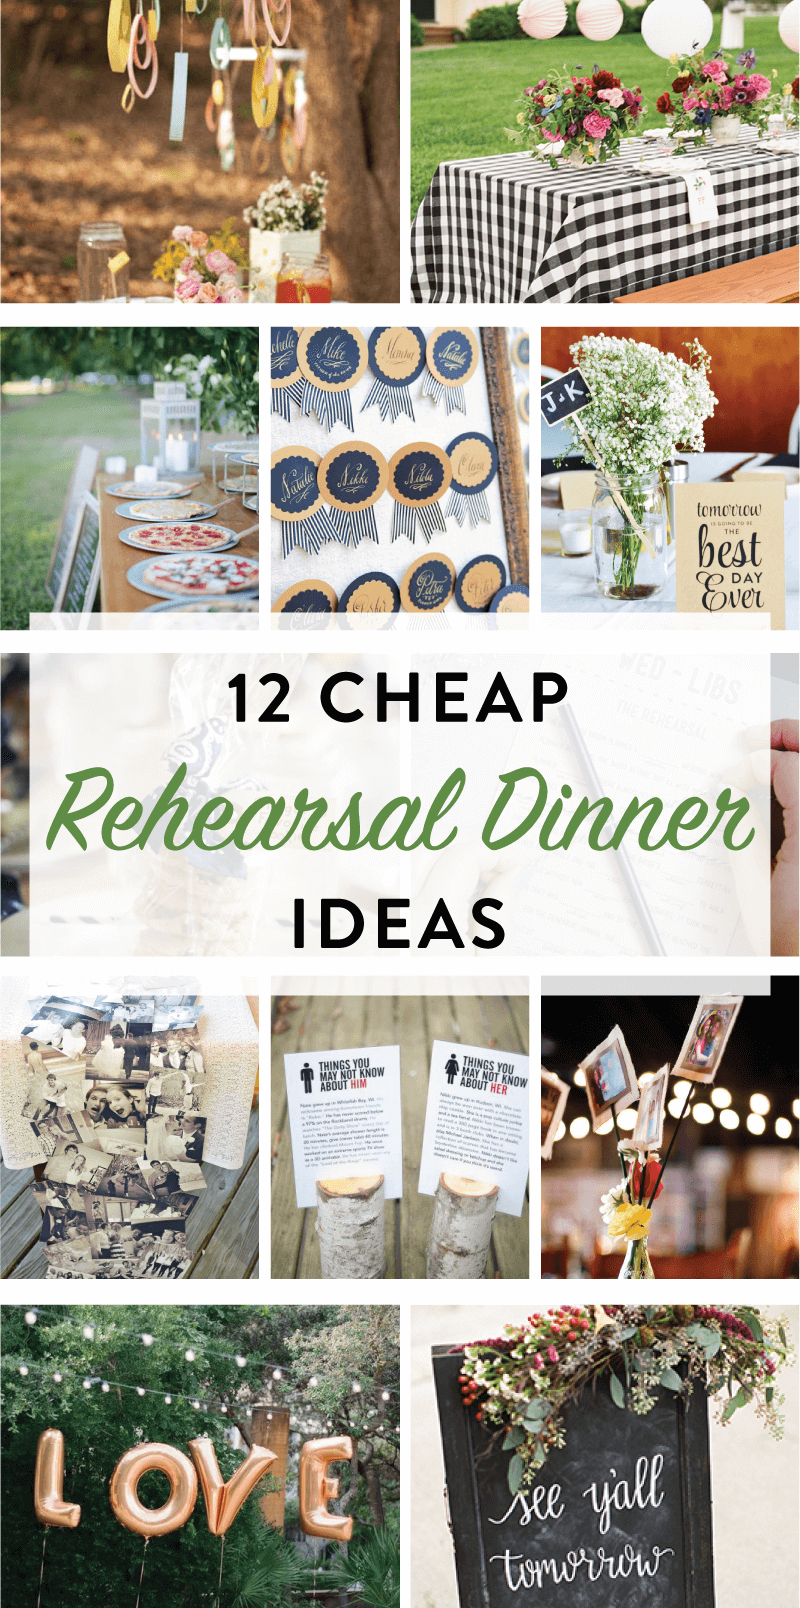 10 Awesome Rehearsal Dinner Table Decorations Ideas 12 cheap rehearsal dinner ideas for the modern bride on love the day 3 2022